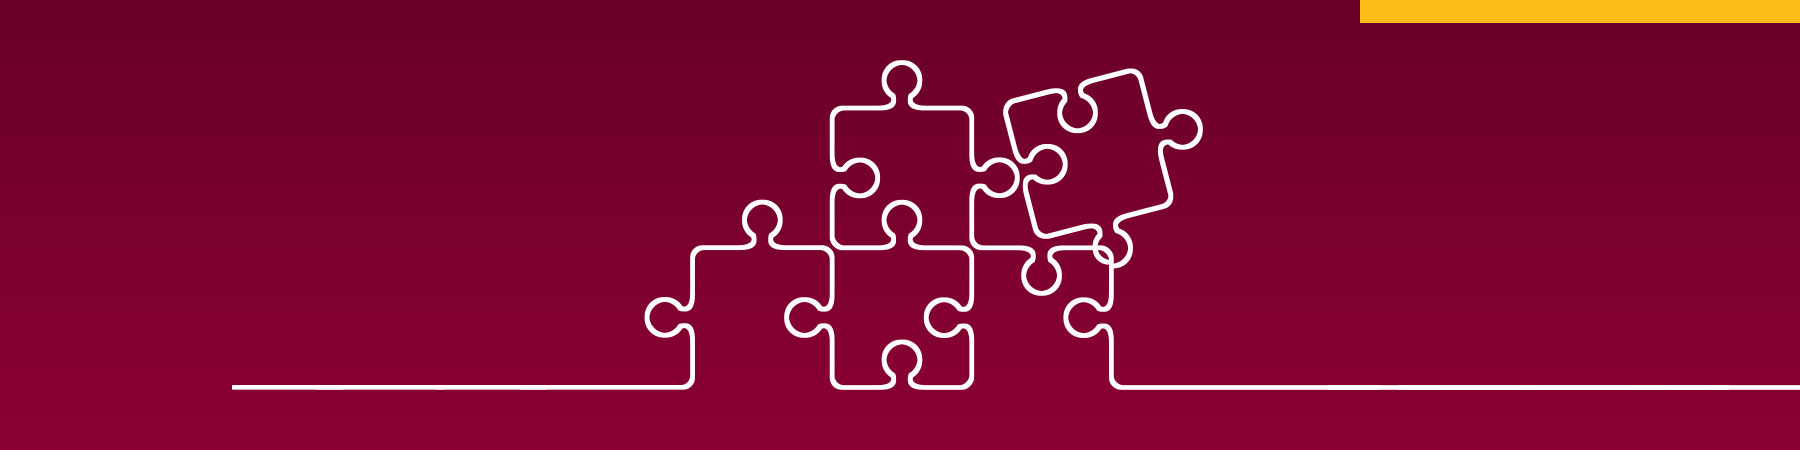 White line illustration of jigsaw puzzle pieces, against a maroon background, to demonstrate Loyola University Chicago's marketing and communication project management team.